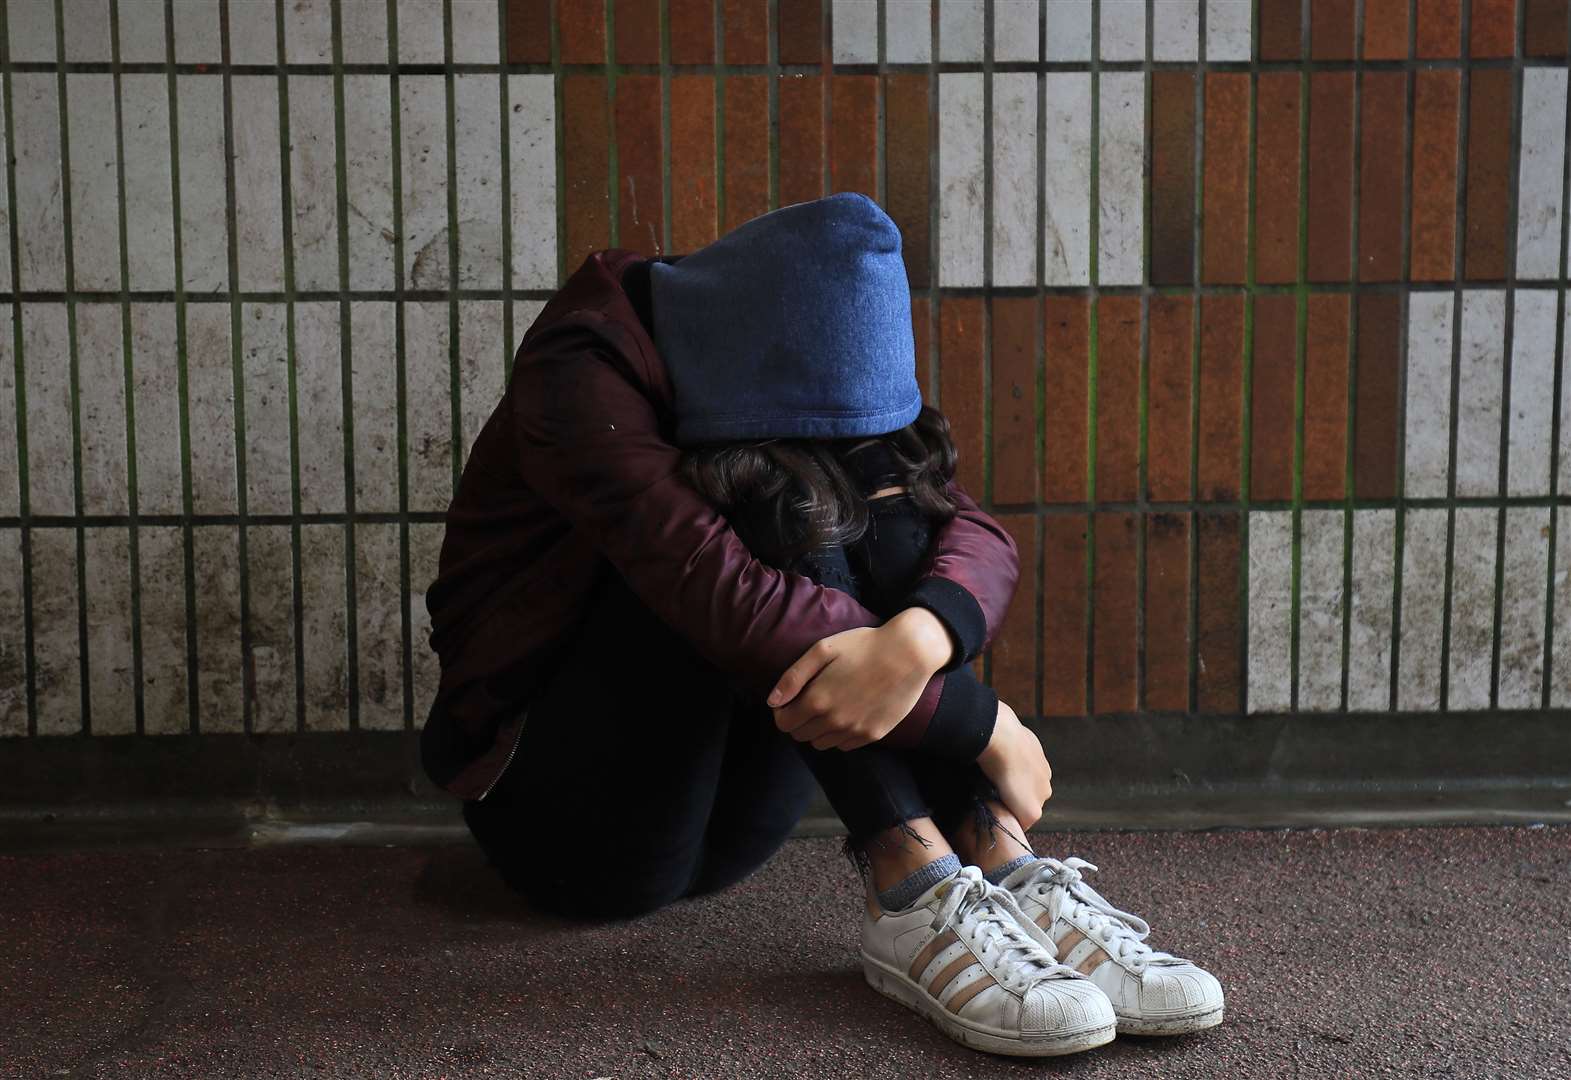 Covid-19 could create 'lost generation of teens'